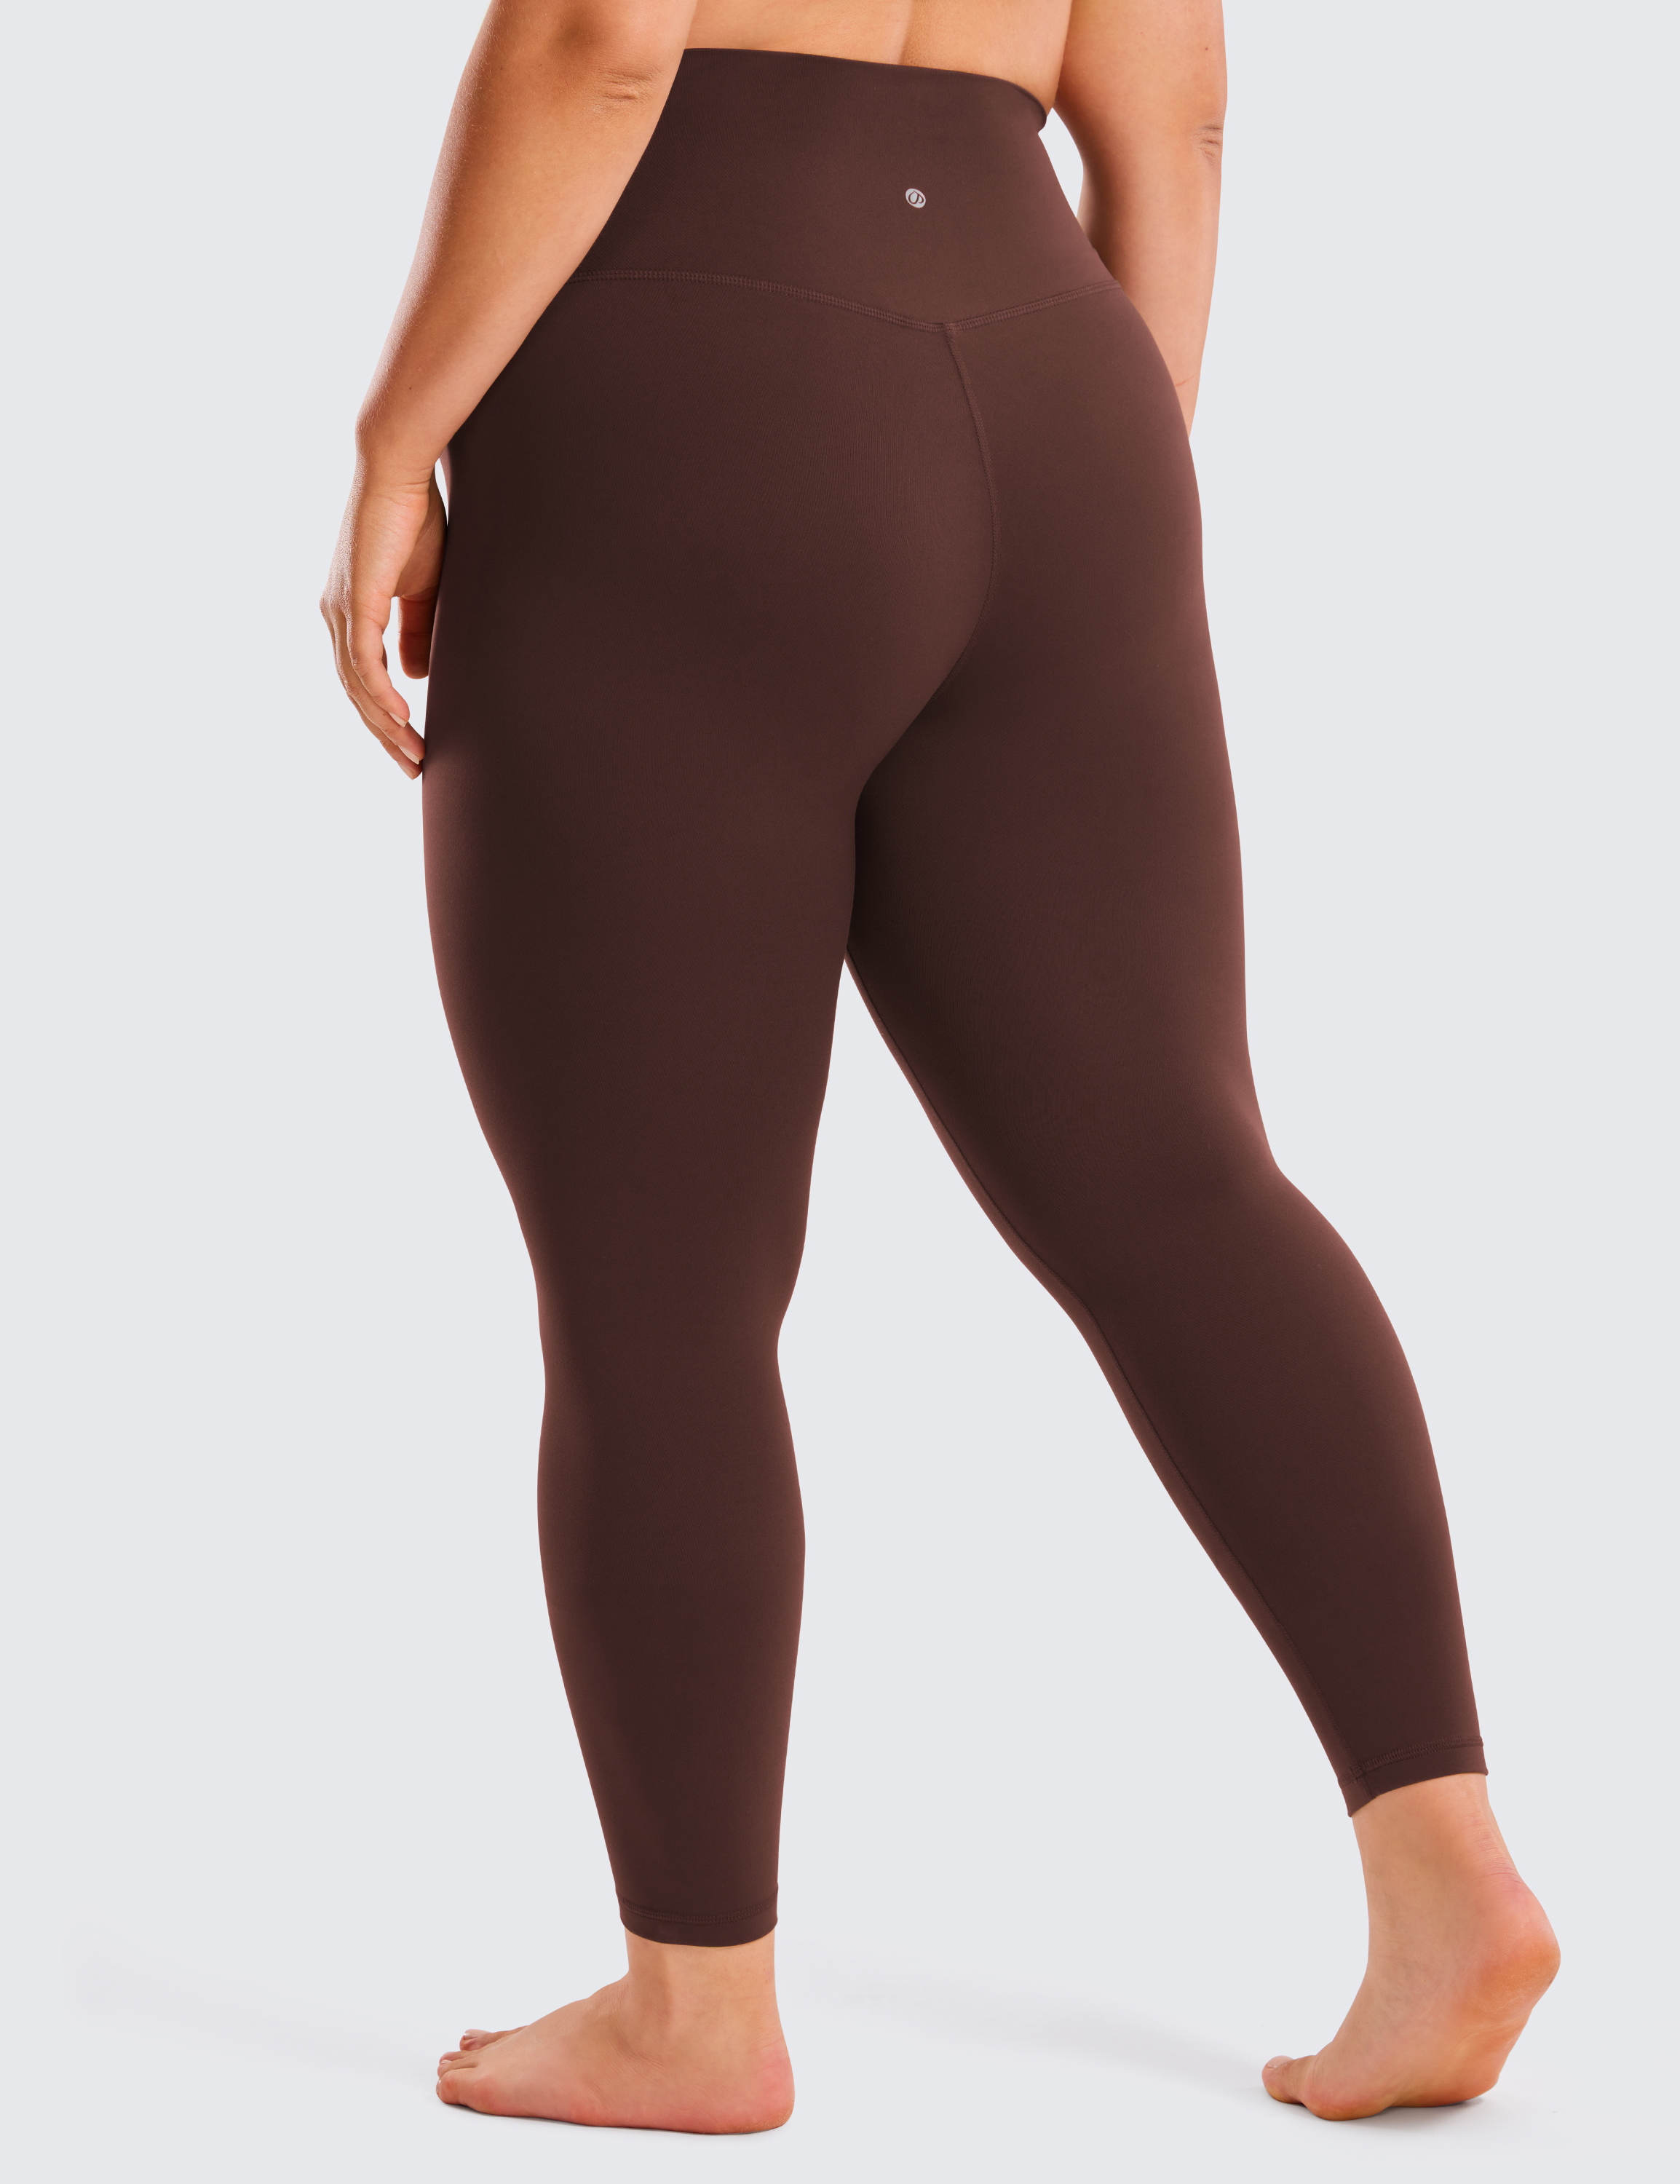 CRZ YOGA Women's Butterluxe Leggings 25 Inches High Waisted Soft Comfort  Yoga Pants Workout Leggings 